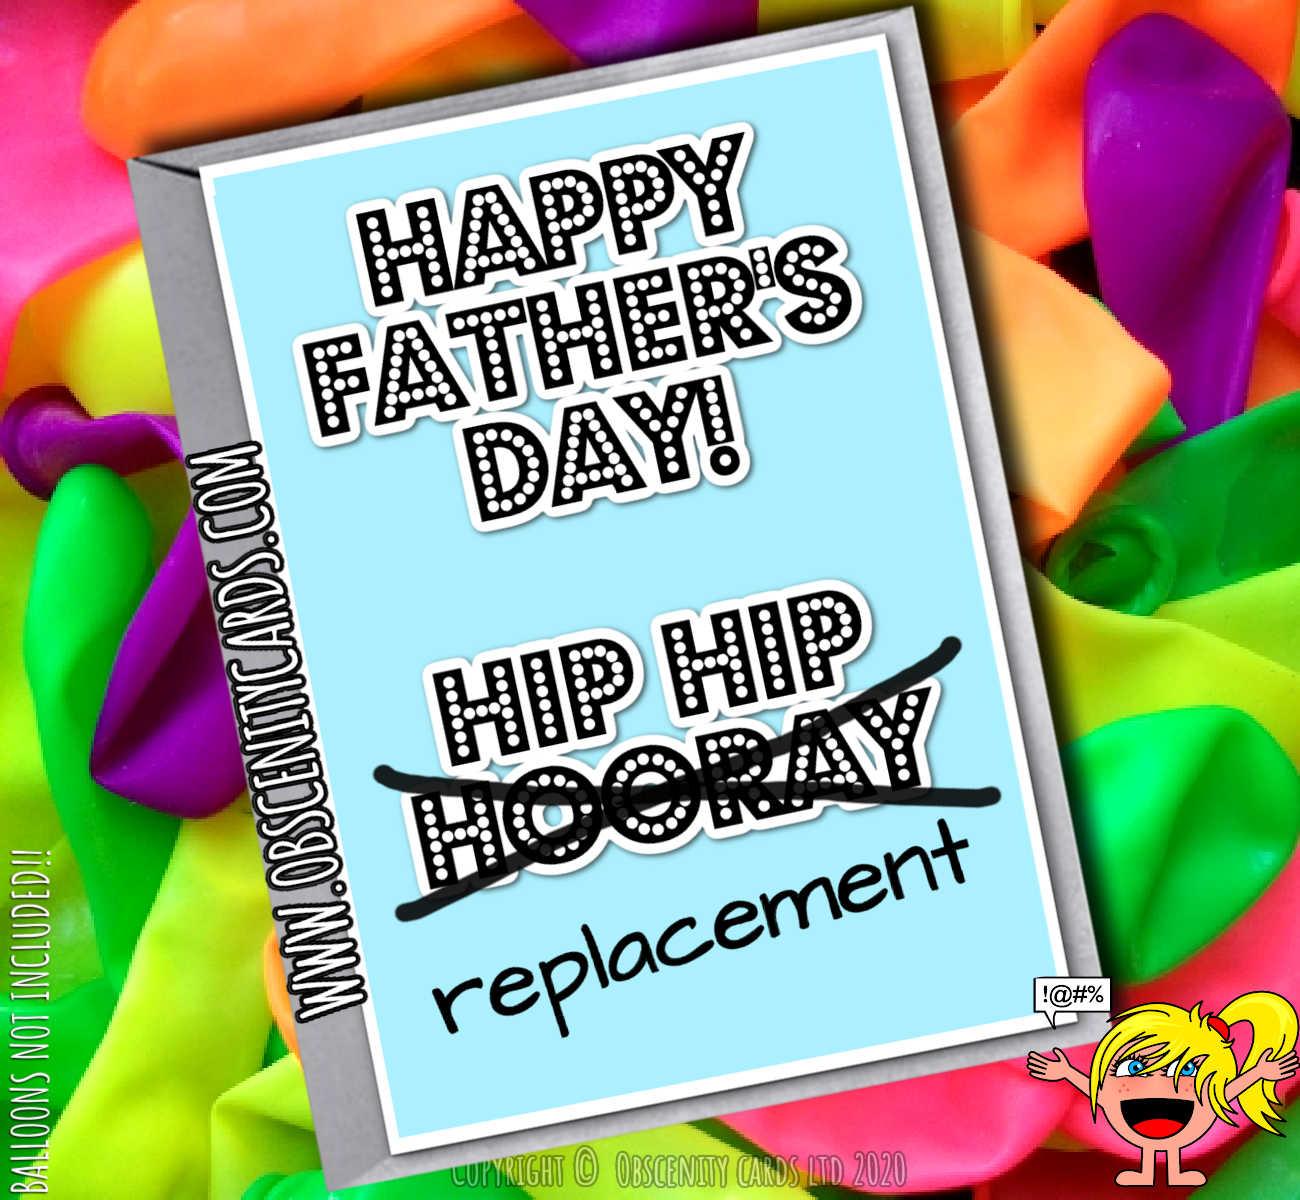 HAPPY FATHER'S DAY HIP HIP HIP REPLACEMENT